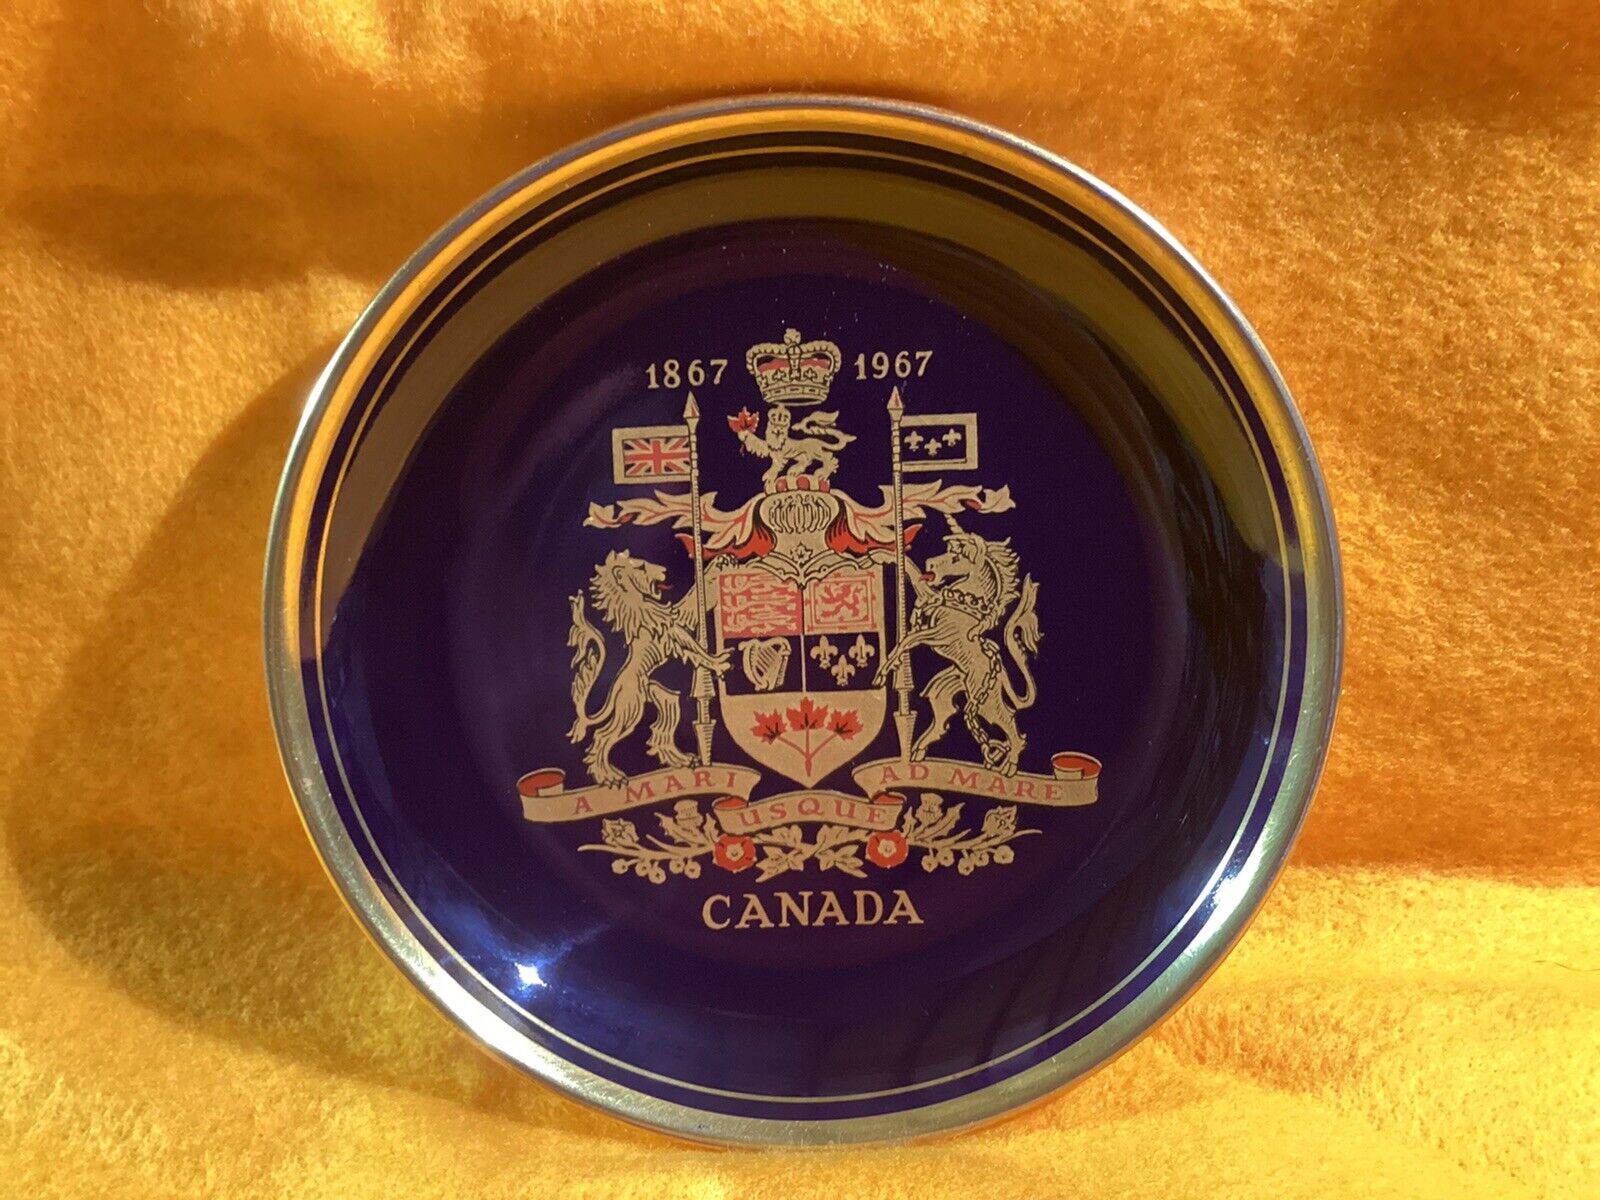  Canadian Centennial Canada Colbalt Blue Plate 1867-1967 Simpsons Potters, Engl.